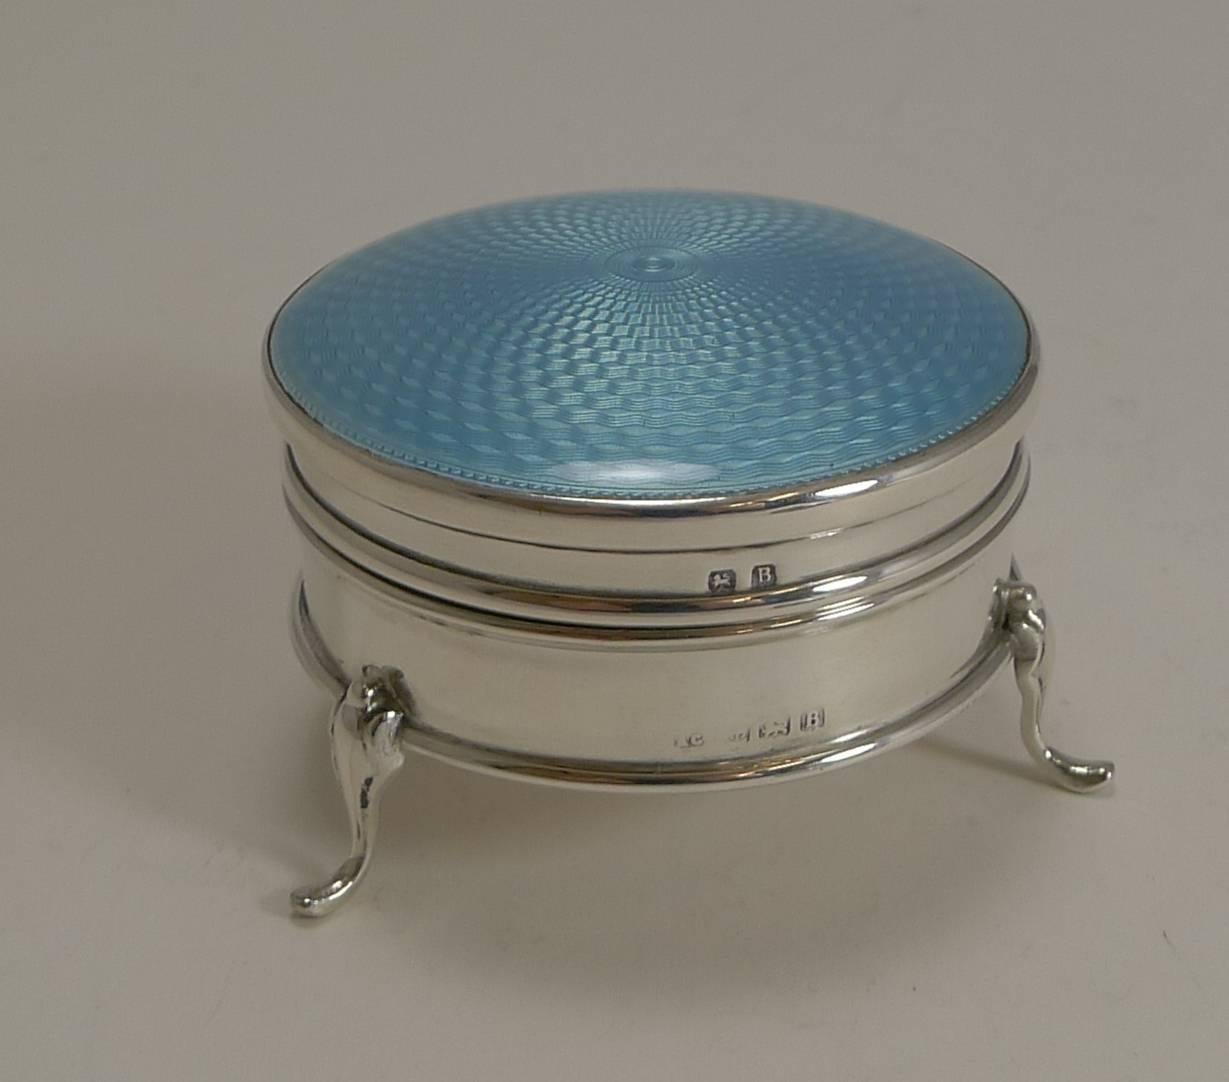 A pretty Art Deco box made from English sterling silver standing on three cabriole legs.

The hinged lid is domed and beautifully decorated with a pretty Aqua / Blue guilloche enamel, without damage. The patina is bright and showcases the